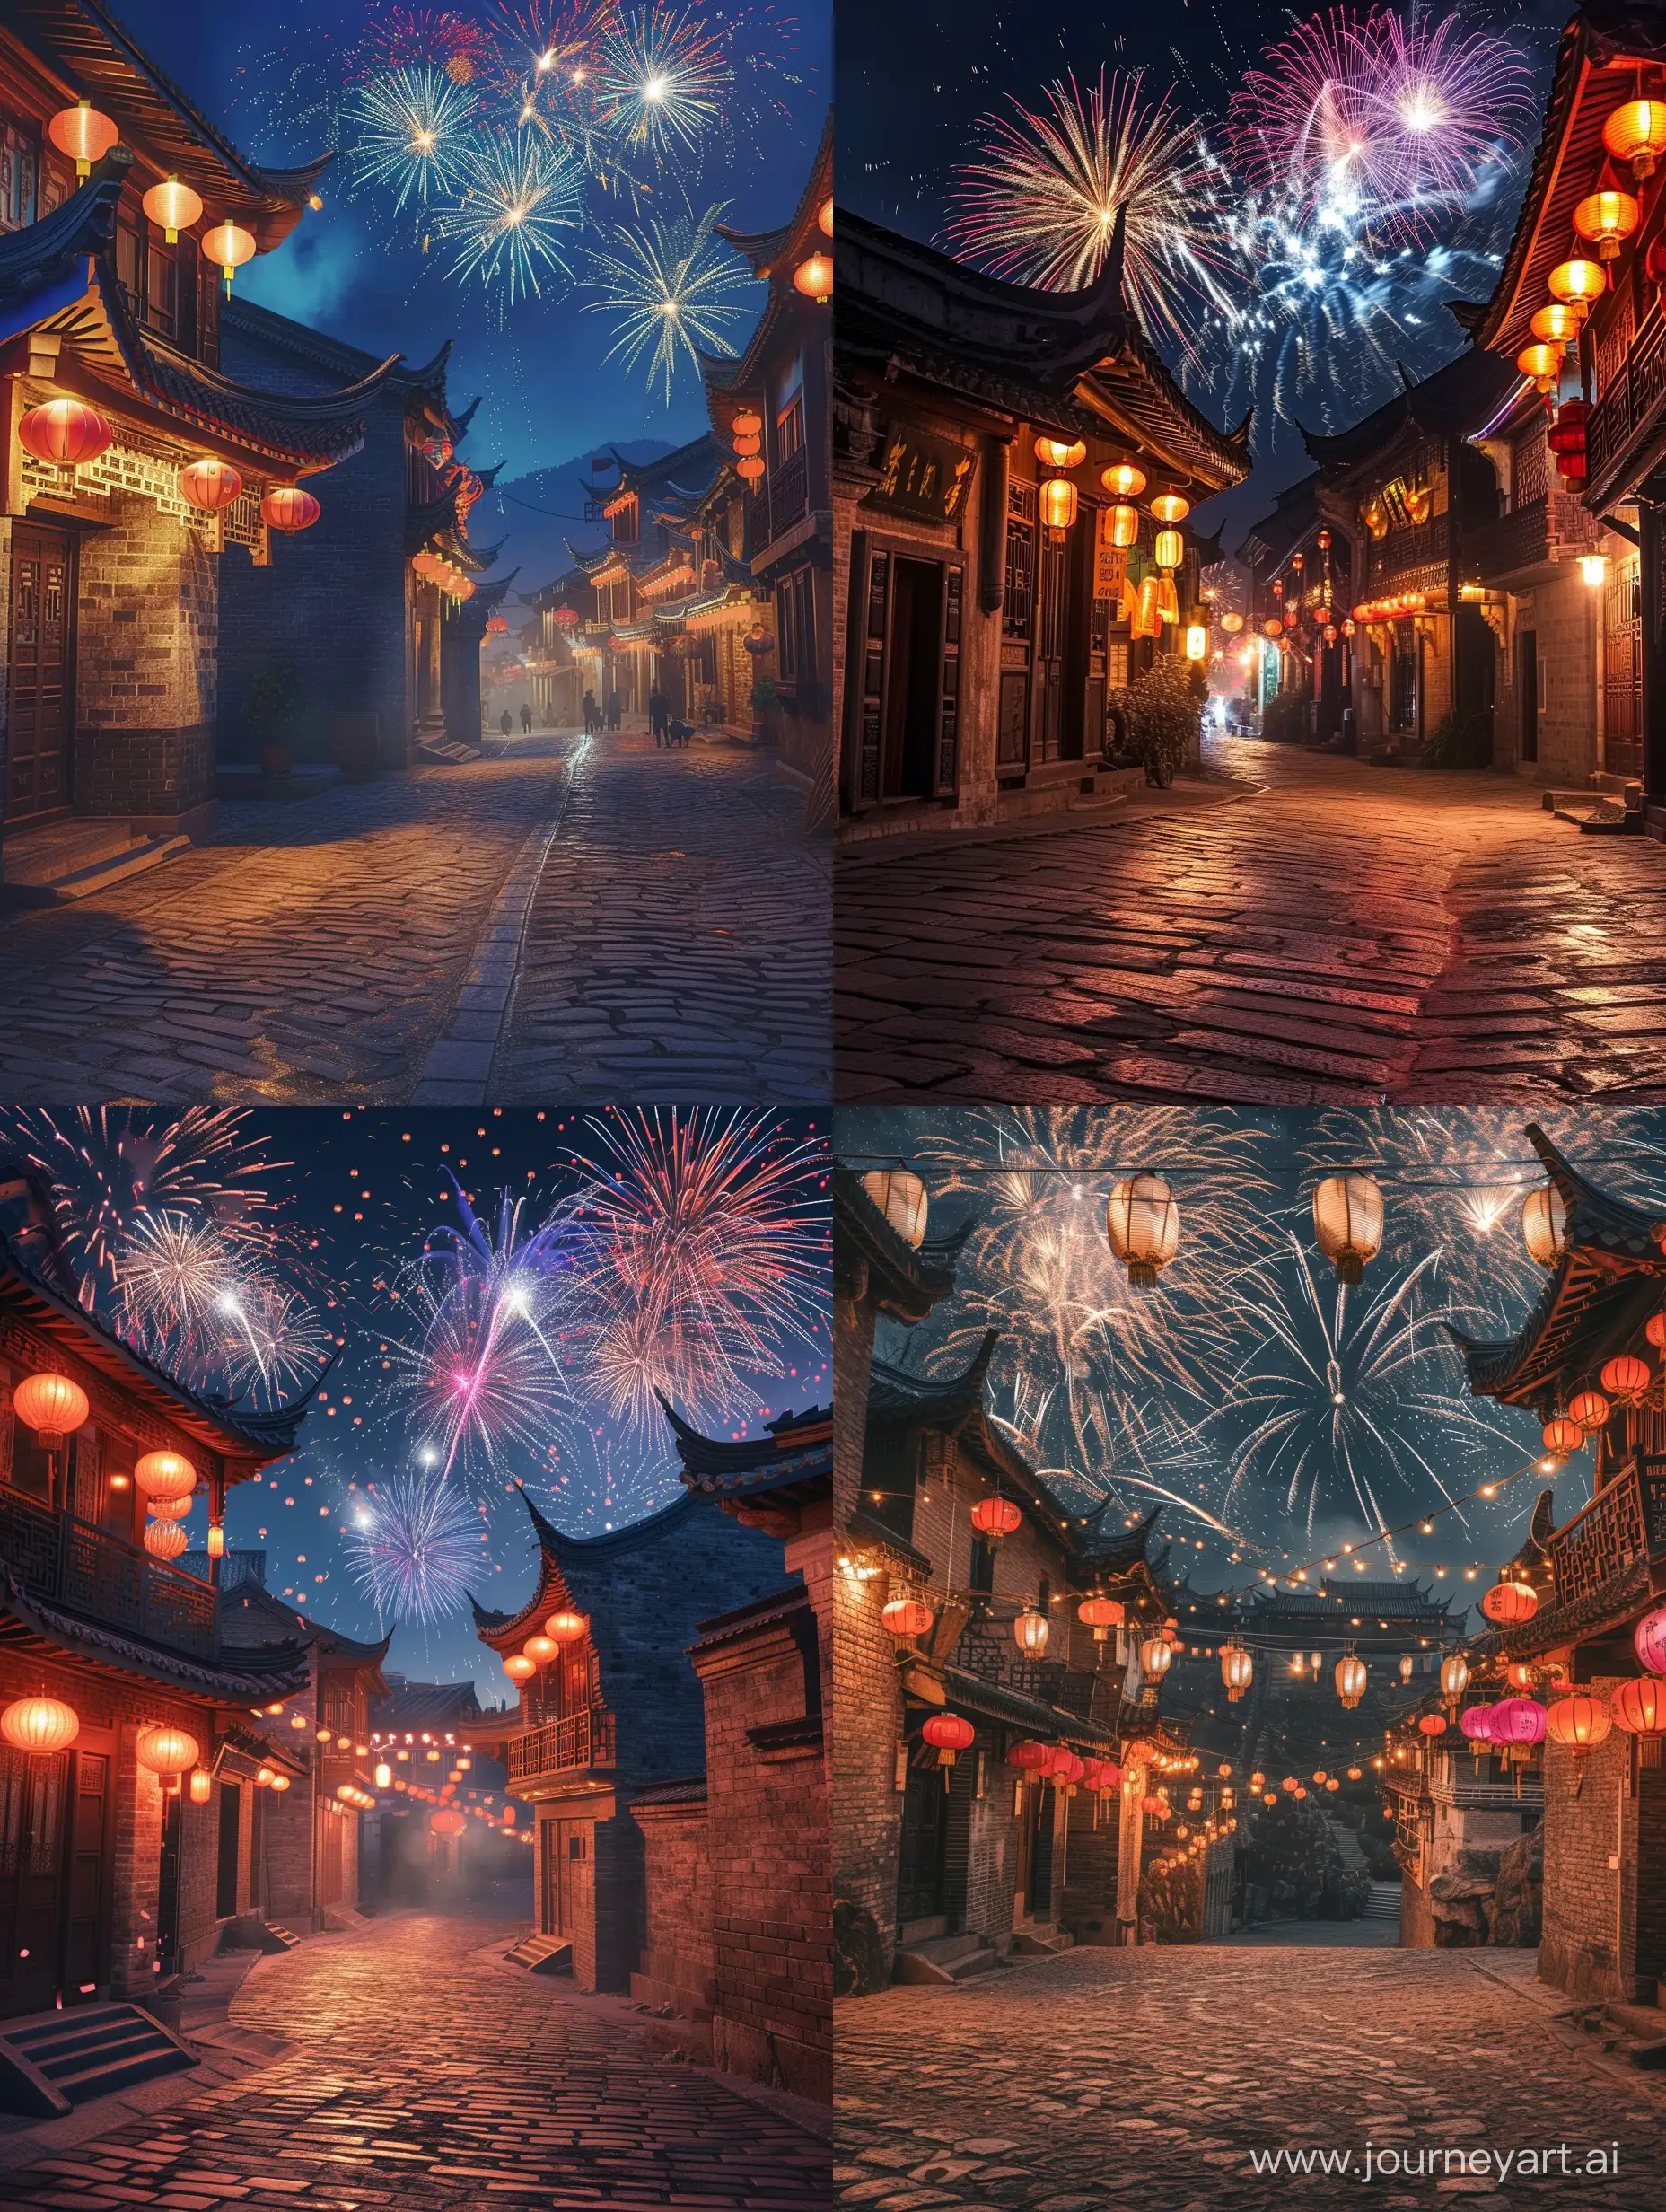 Chinese New Year atmosphere, cobblestone streets, ancient buildings adorned with lanterns, fireworks lighting up the night sky.